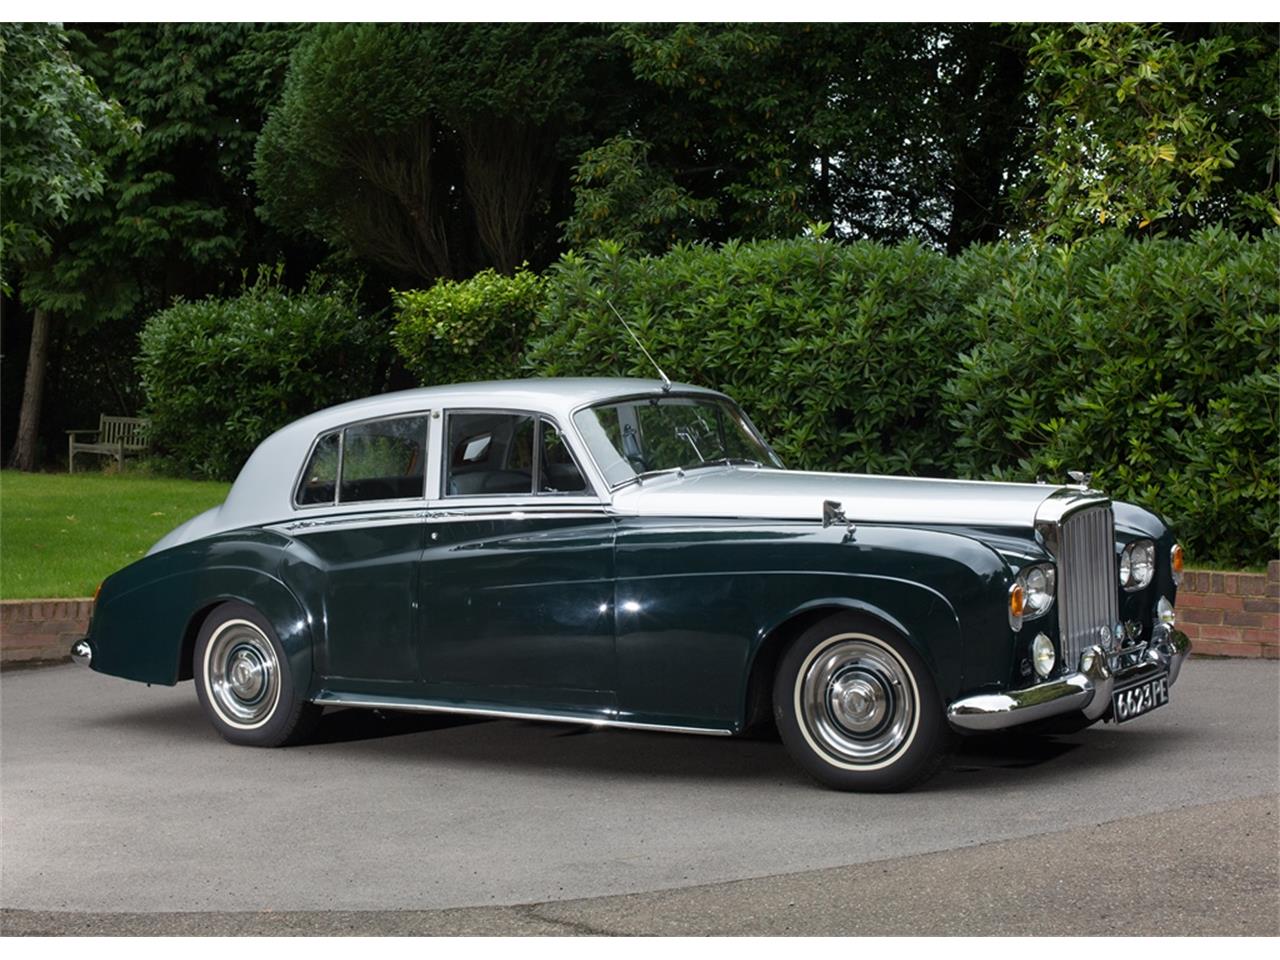 1963 Bentley S3 Saloon ‘Henry’ for Sale | ClassicCars.com | CC-1018858